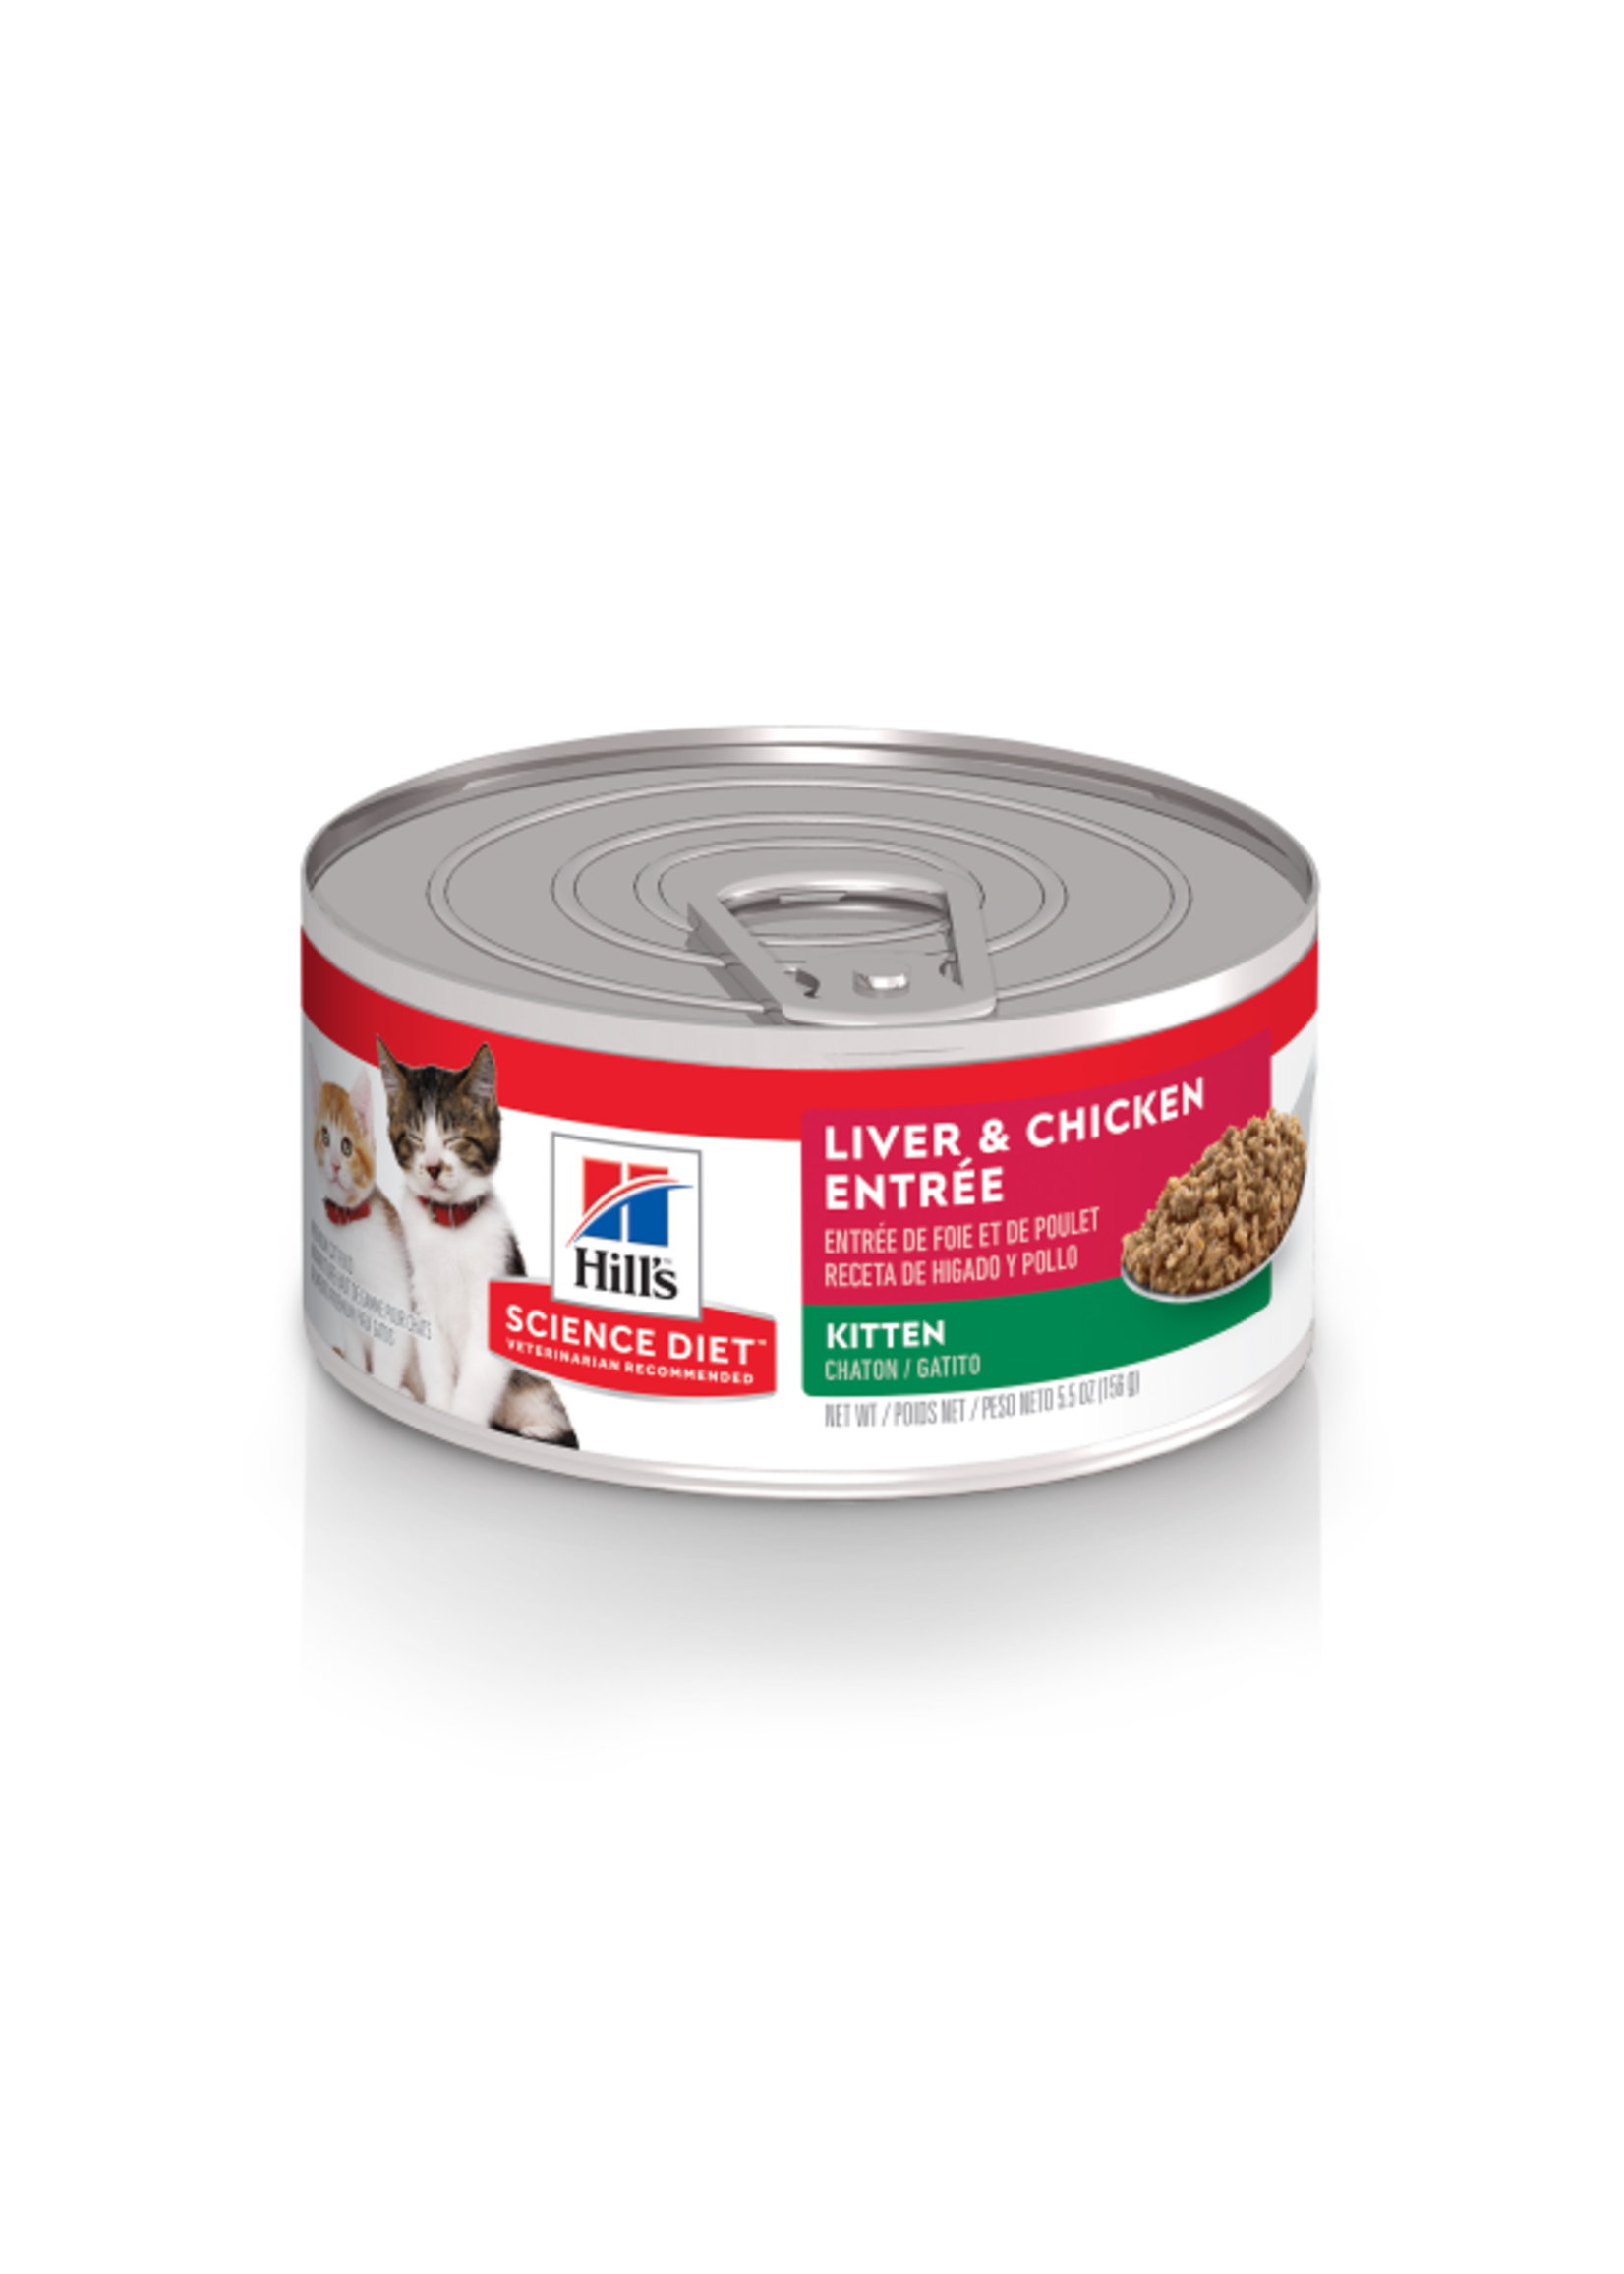 Hill's Science Diet Hill's Science Diet - Cat Kitten Liver & Chk Entree 5.5 oz